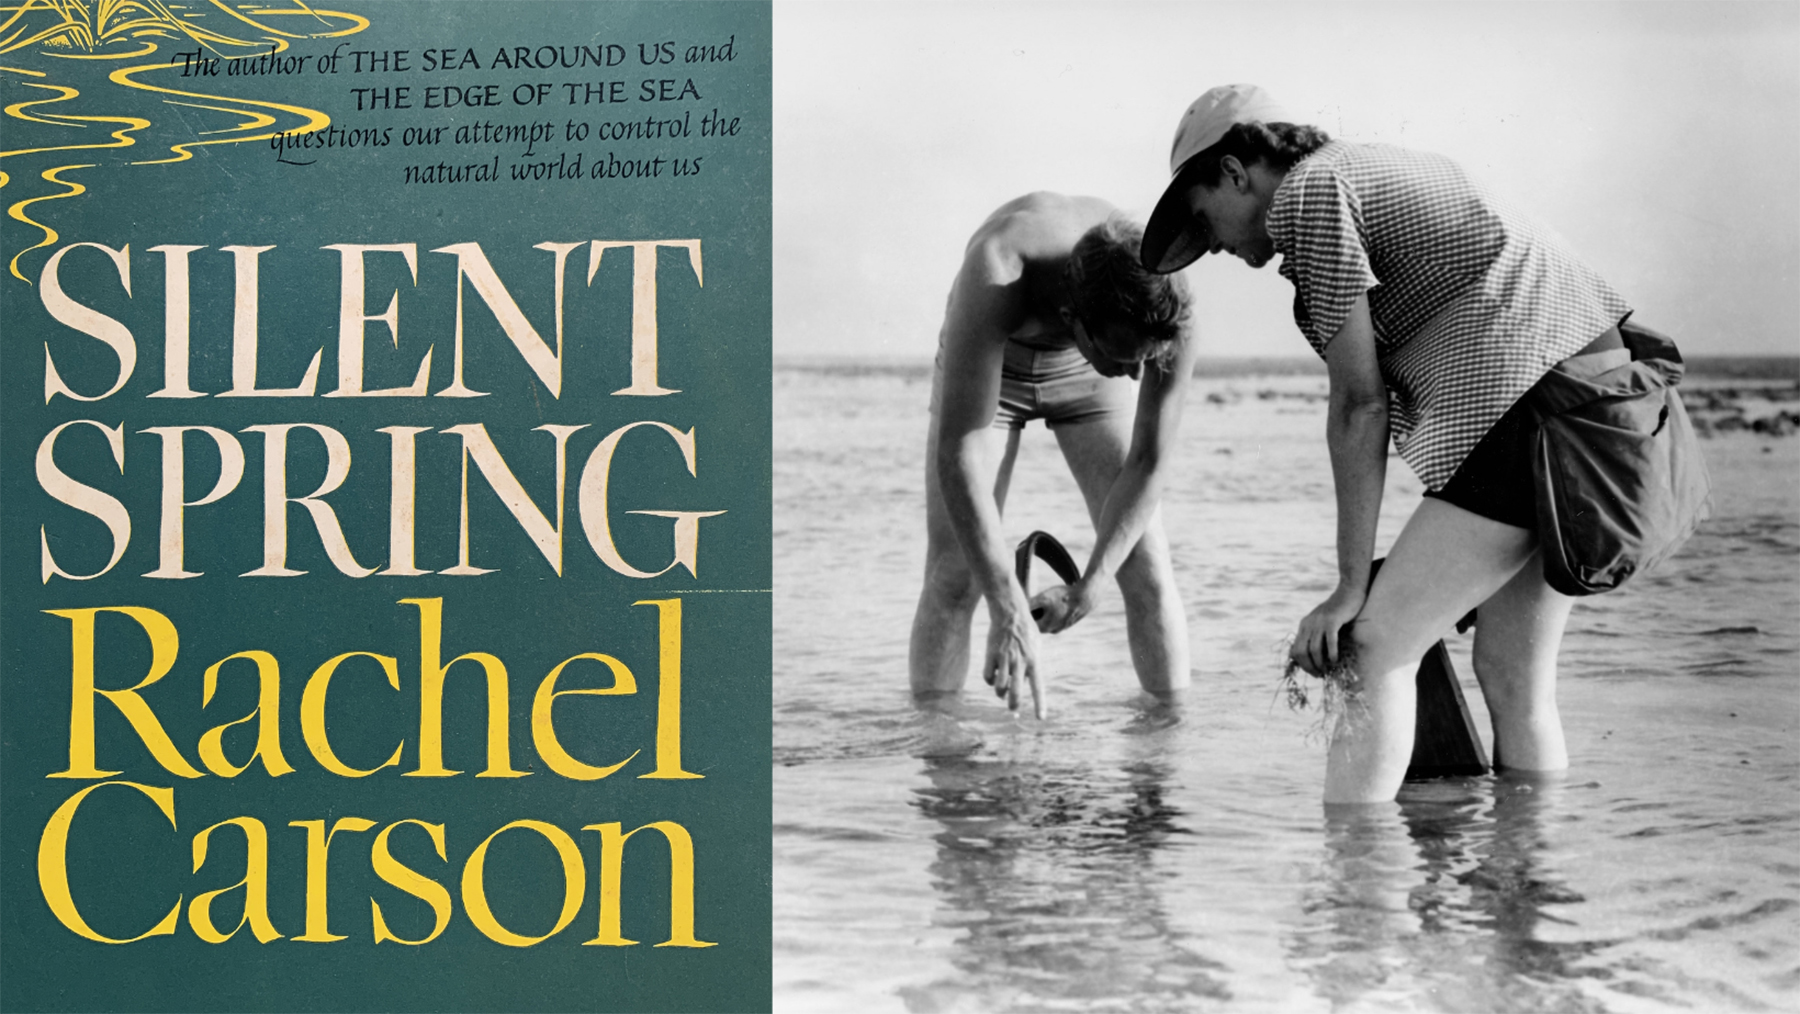 Left: Book cover for Silent Spring, by Rachel Carson. Right: Carson conducts Marine Biology Research with Bob Hines in the Atlantic, 1952, image via Wikimedia Commons.